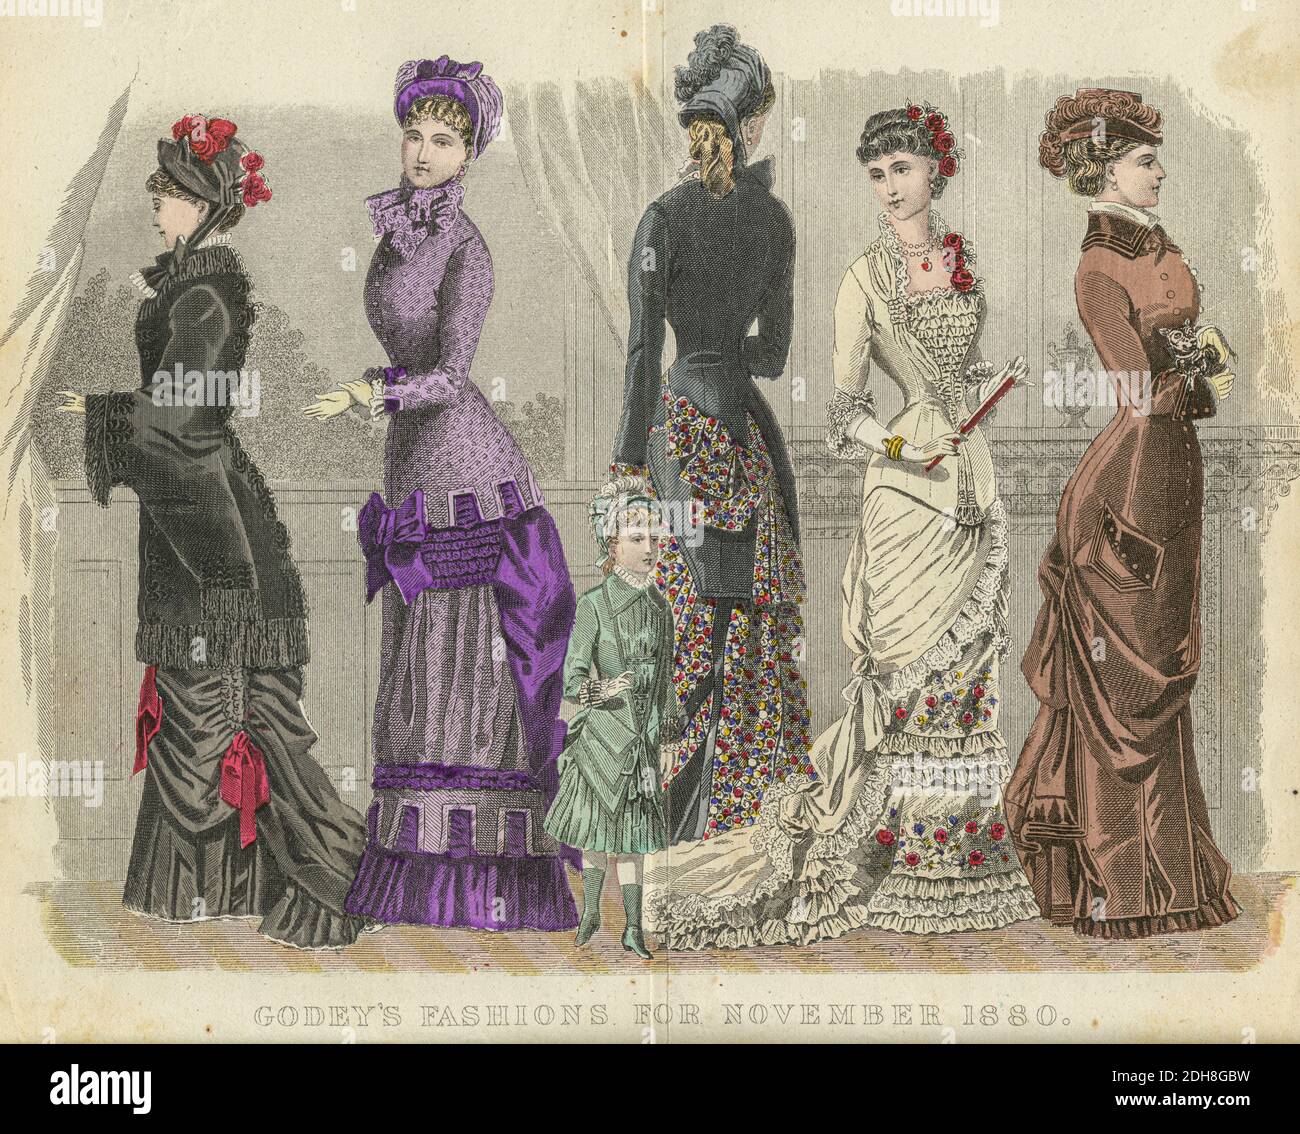 Colour drawing of Godey's women's Fashion for November 1880 from Godey's Lady's Book and Magazine, 1880 Philadelphia, Louis A. Godey, Sarah Josepha Hale, Stock Photo